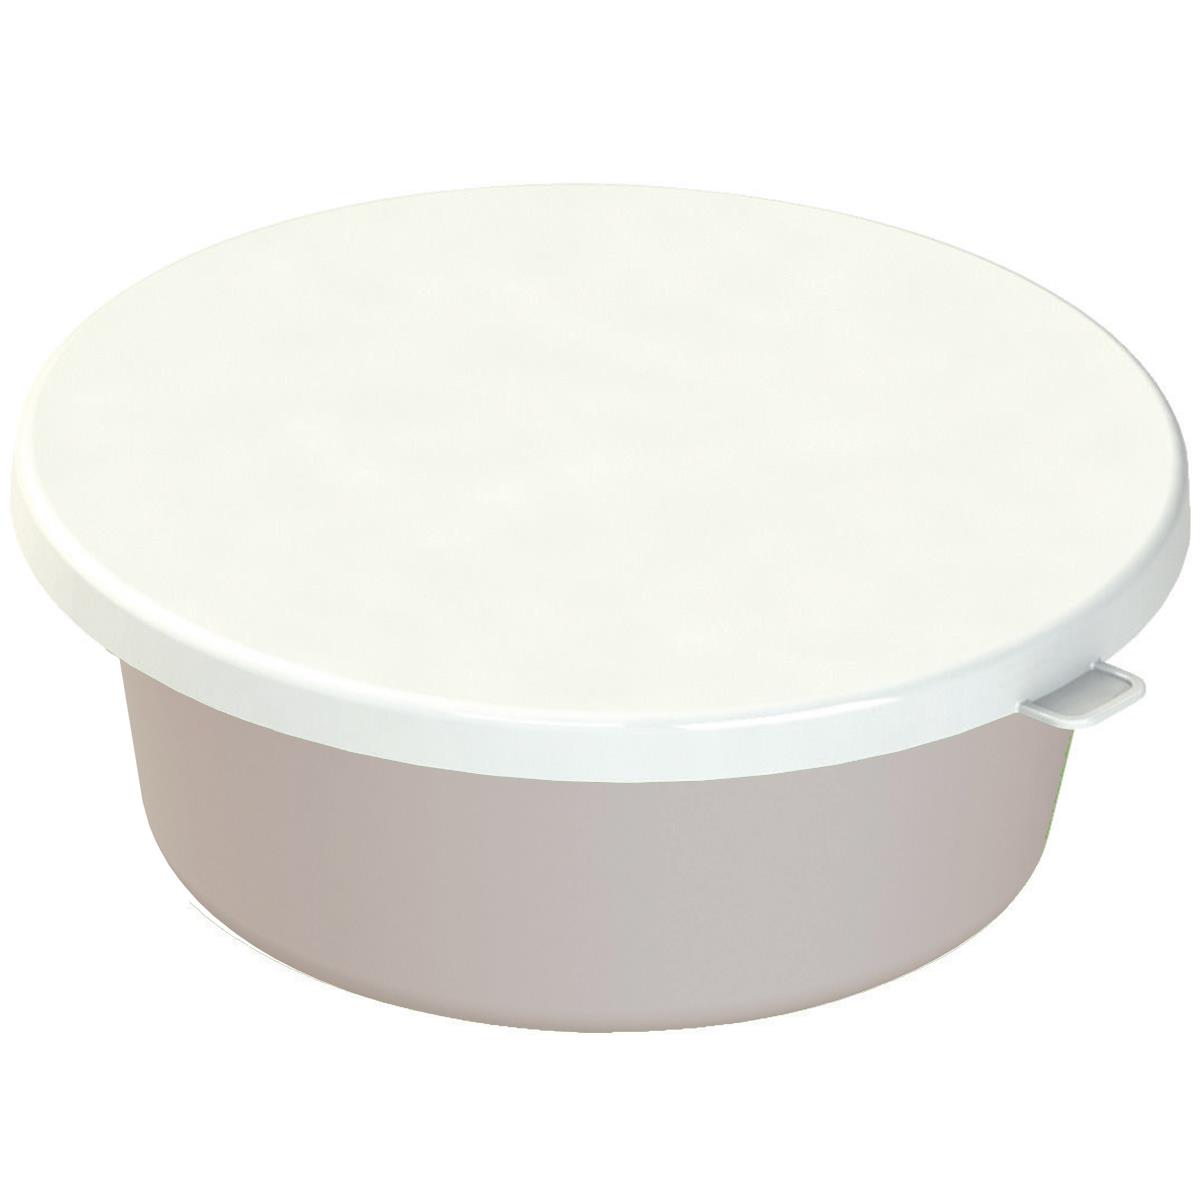 food bowl with lid 6L grey